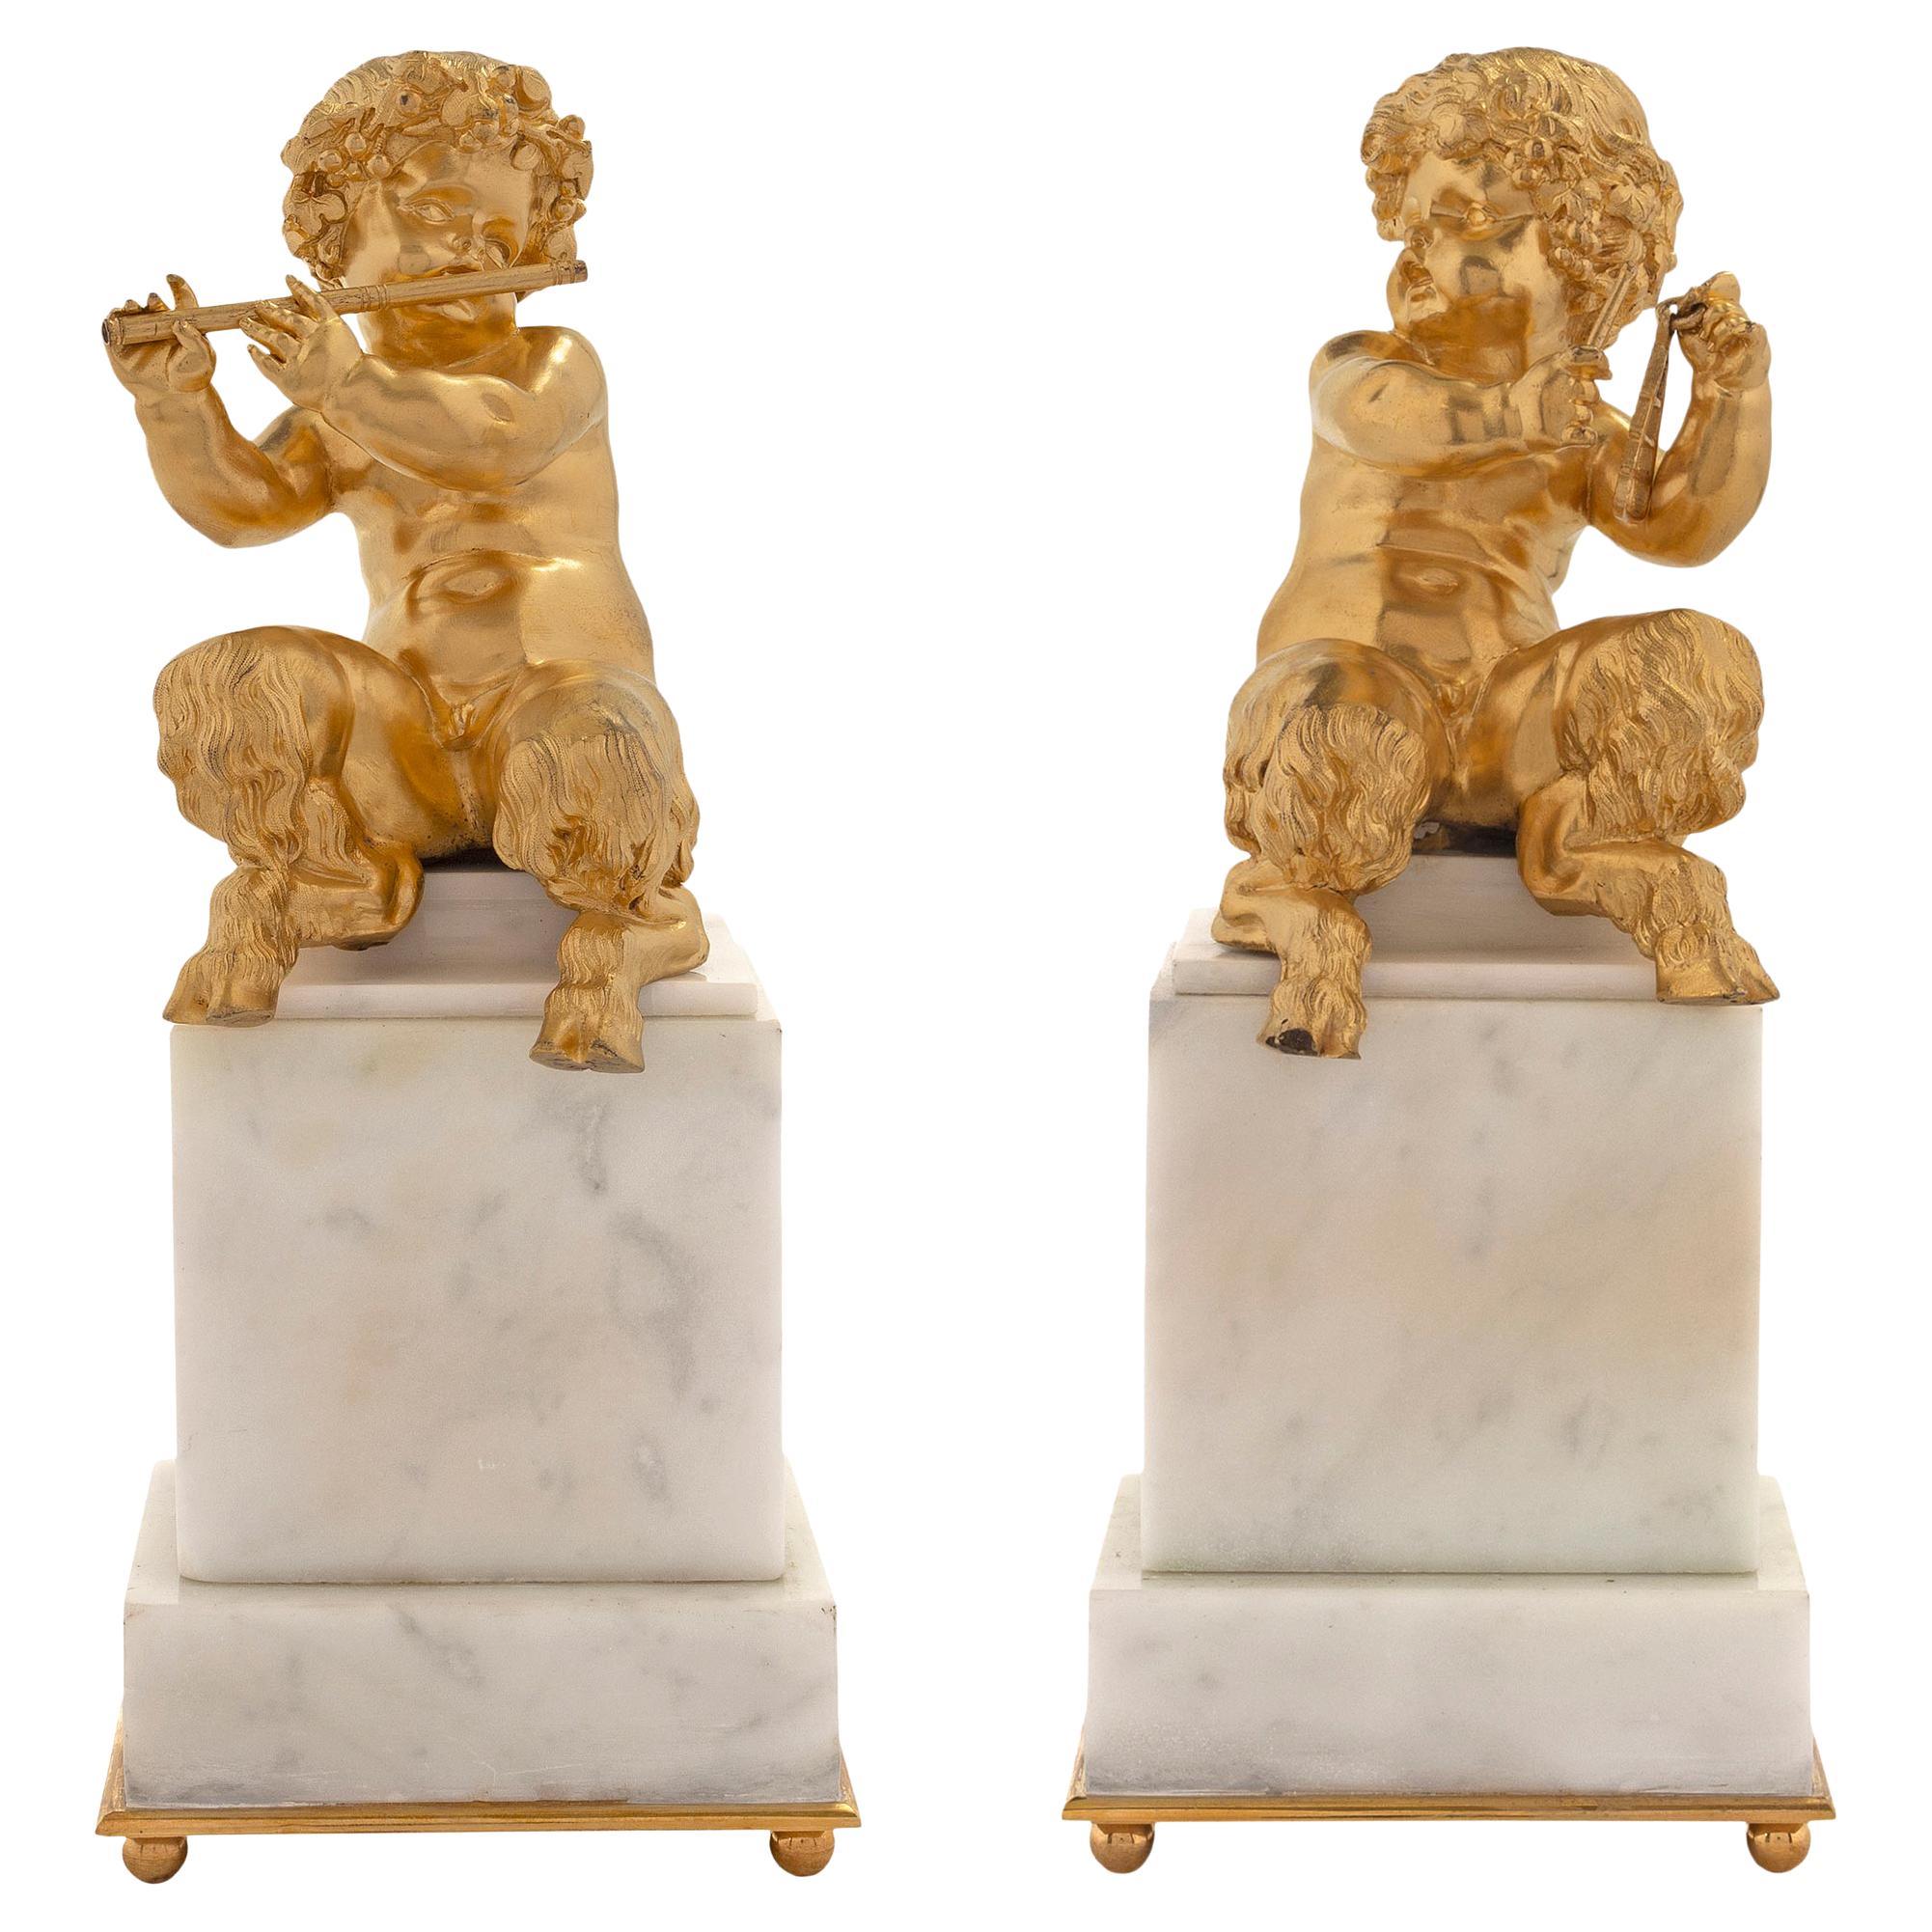 Pair of French Mid-19th Century Louis XVI Style Statues of Young Cherubs